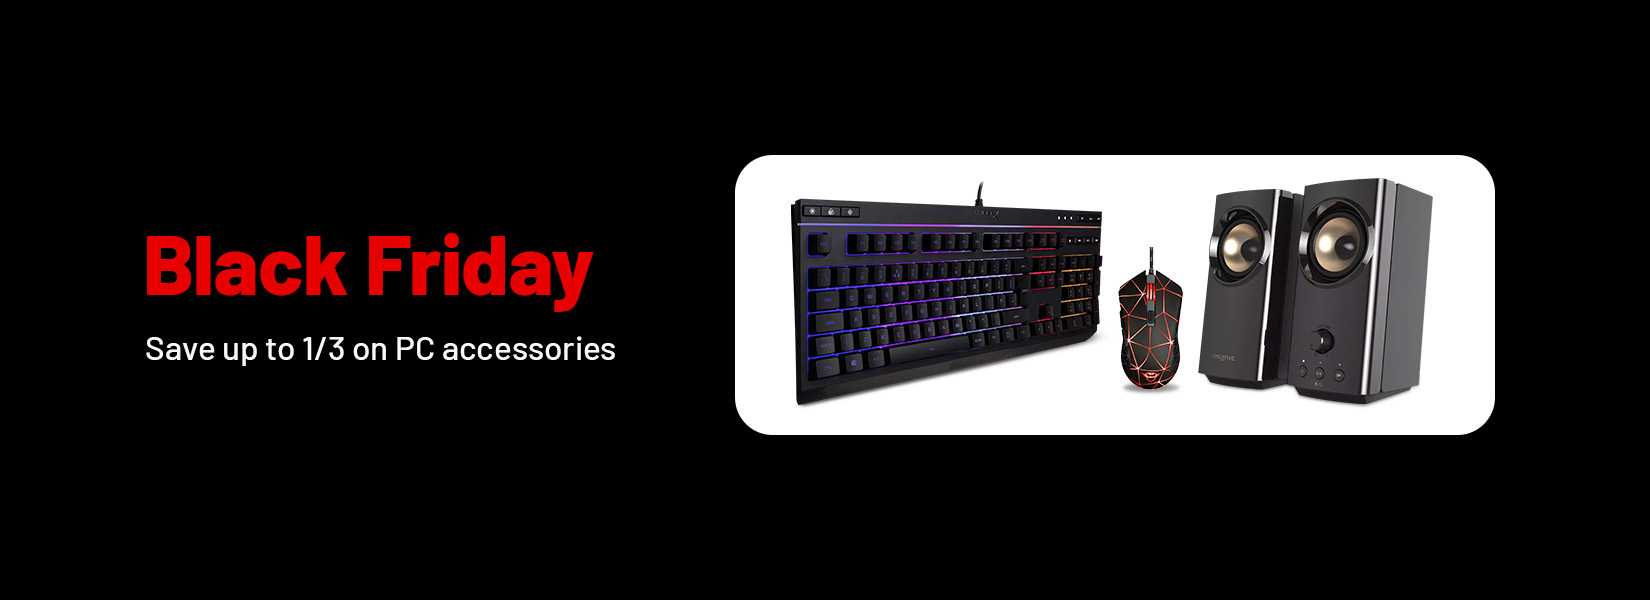 Black Friday. Save up to 1/3 on selected PC accessories.